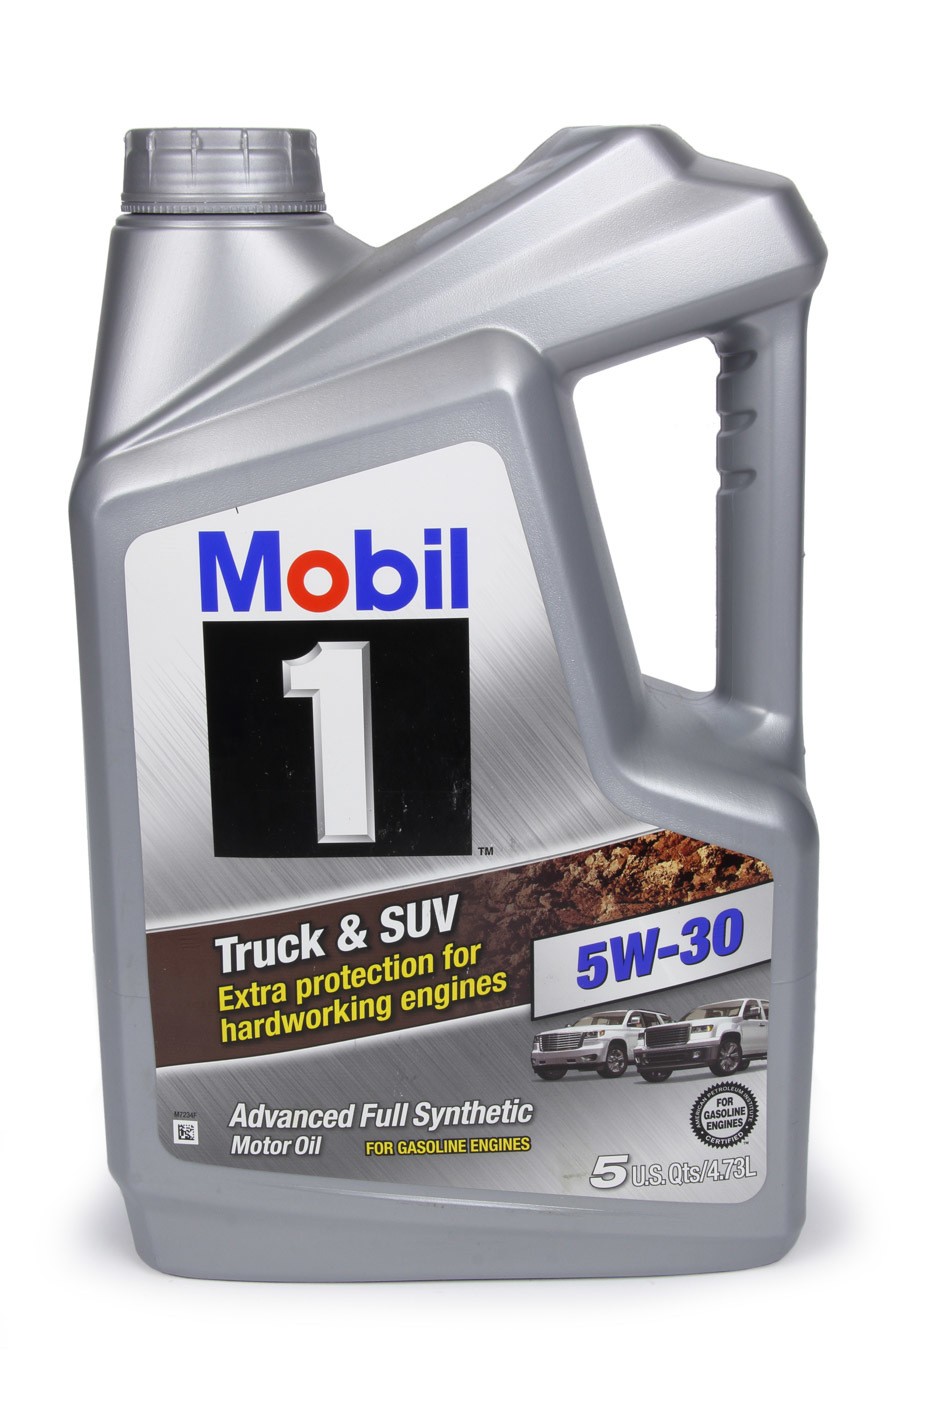 MOBIL 1 Motor Oil Truck and SUV 5W30 Synthetic 5 qt Jug Each